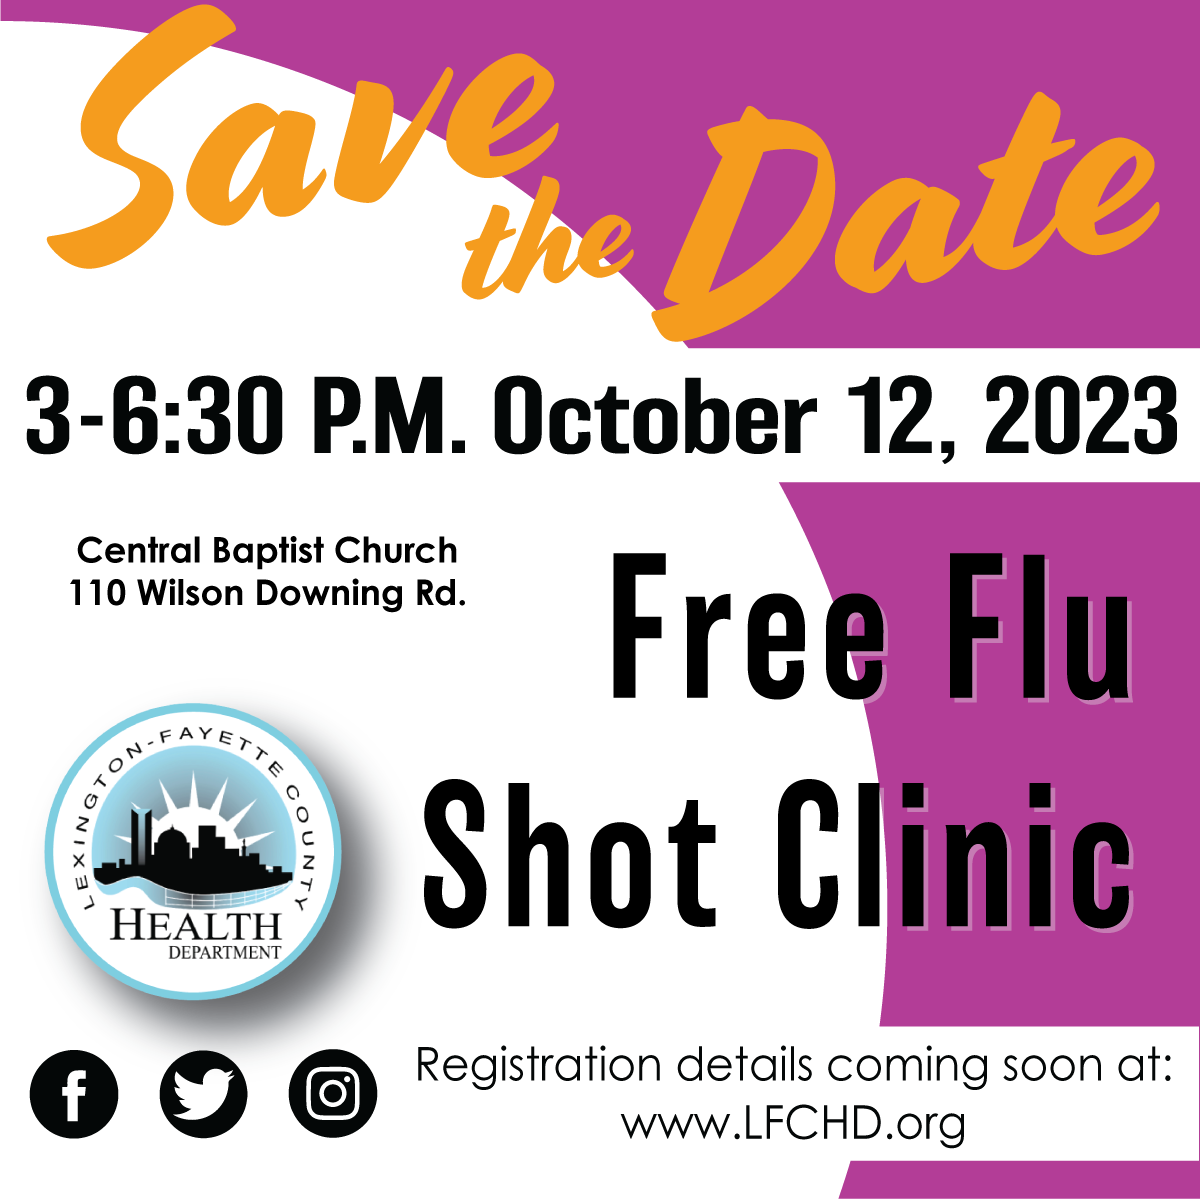 Save the date: Free flu shot clinic to be held Oct. 12!